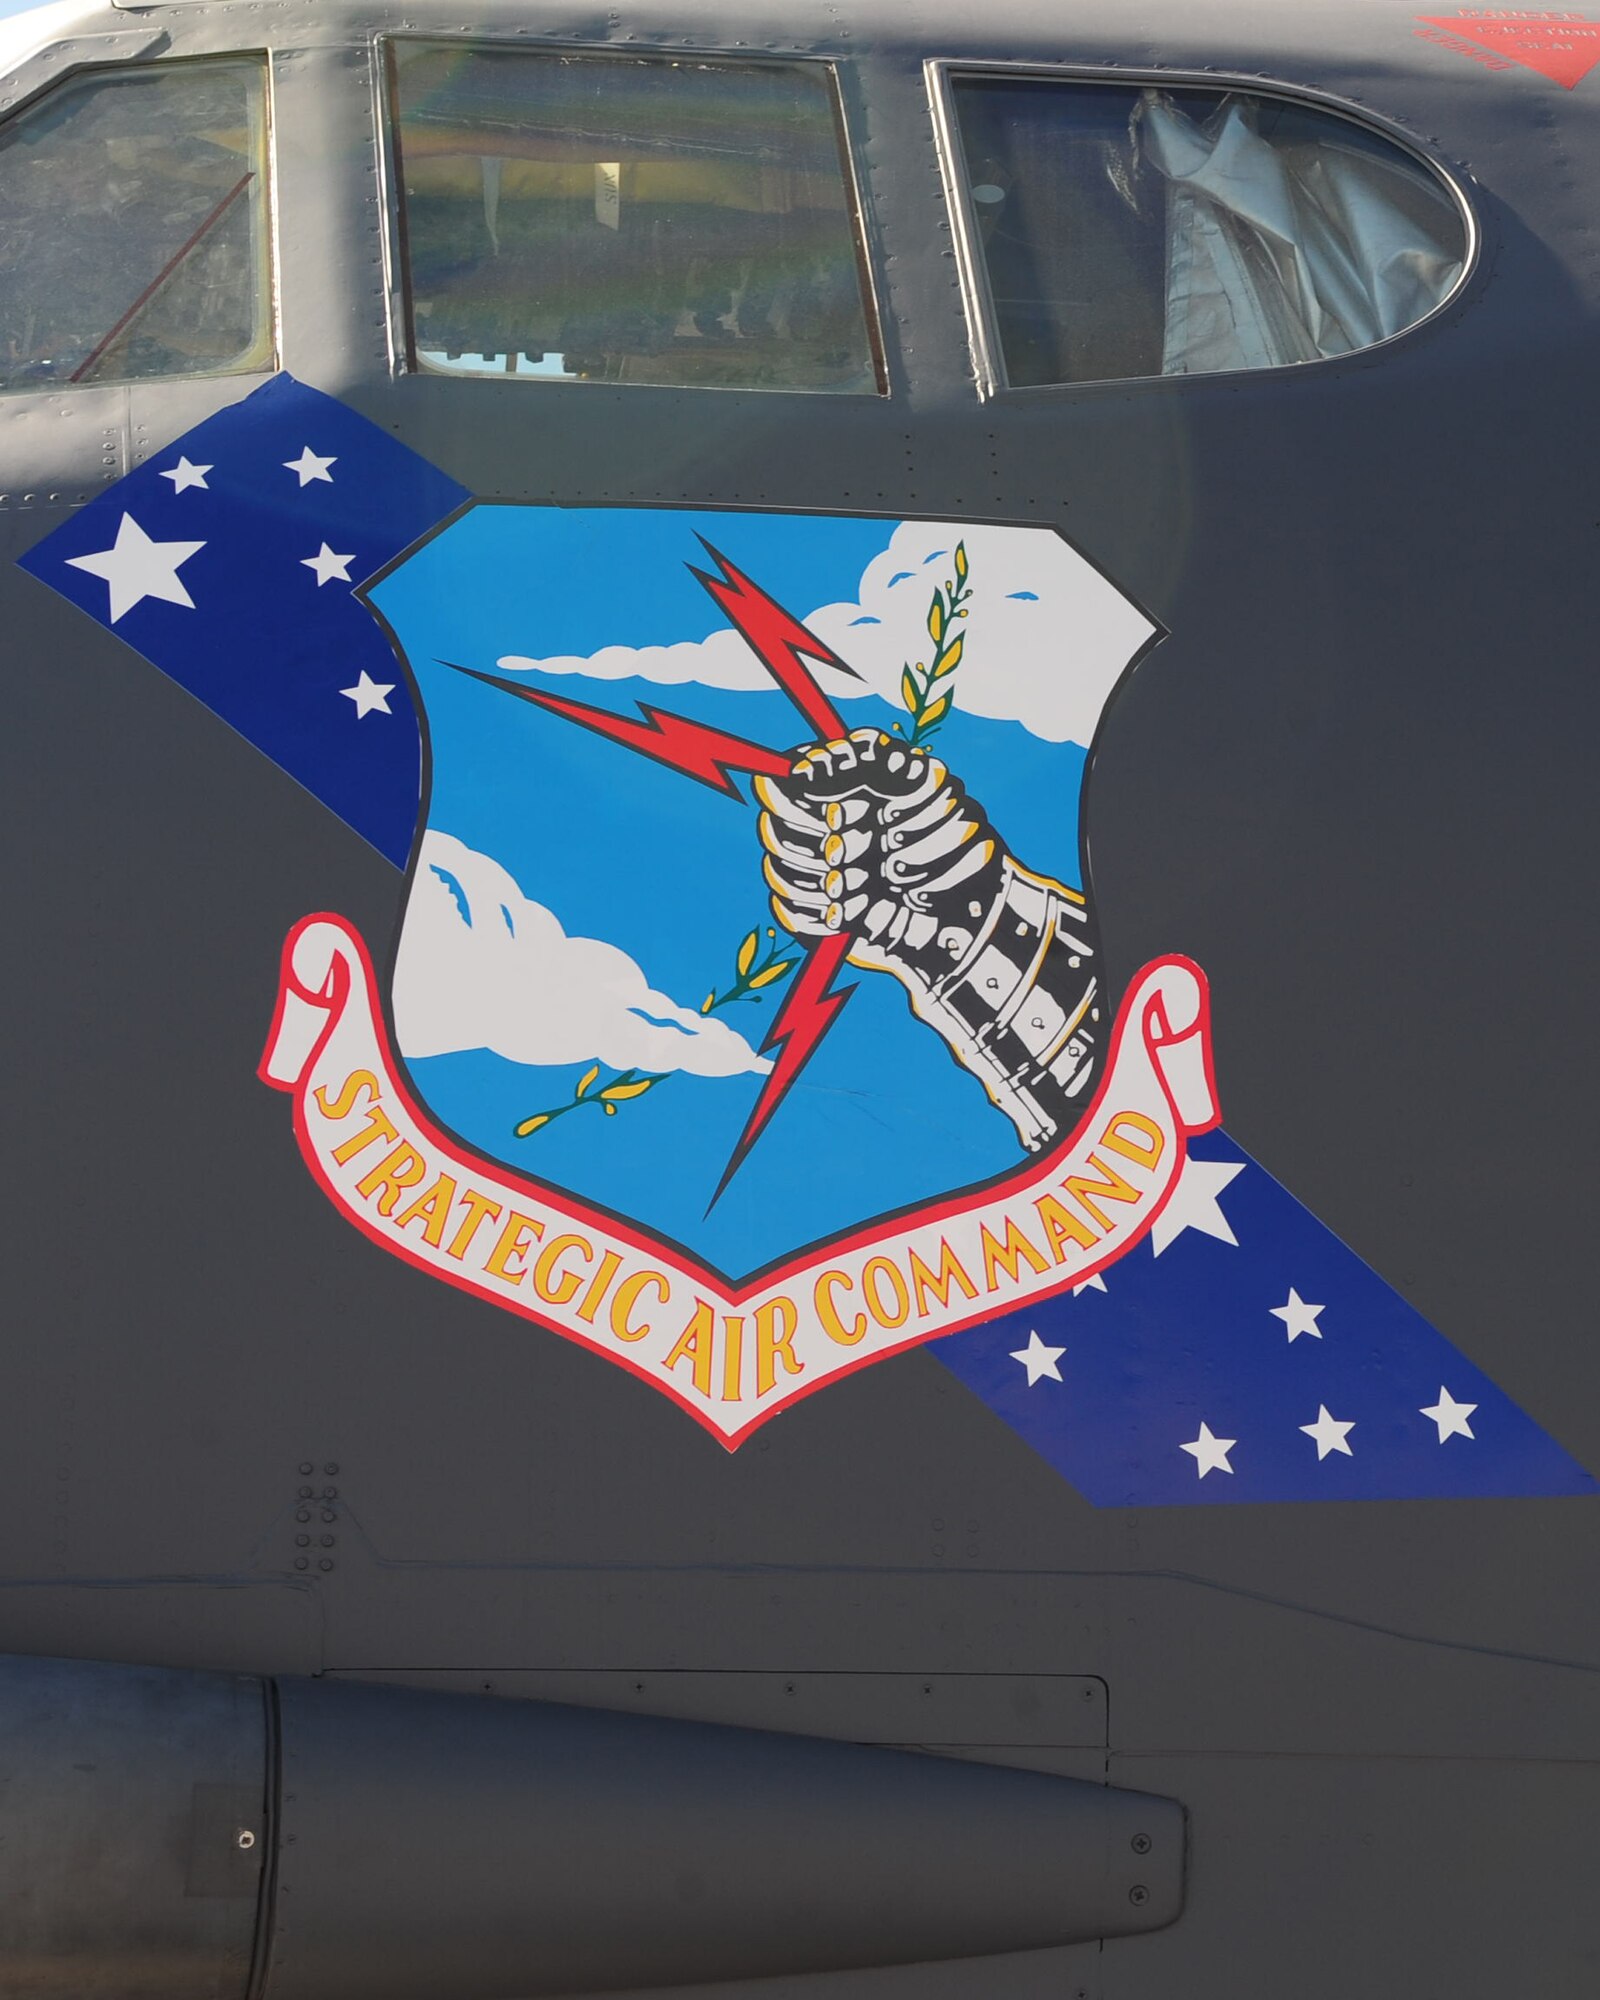 MINOT AIR FORCE BASE, N.D. -- A B-52H Stratofortess received nostalgic nose art for the 50th anniversary of its arrival to Minot AFB here Aug. 19. The Strategic Air Command patch was added for the ceremony to commemorate the airframe’s history. (U.S. Air Force photo/Senior Airman Michael J. Veloz)